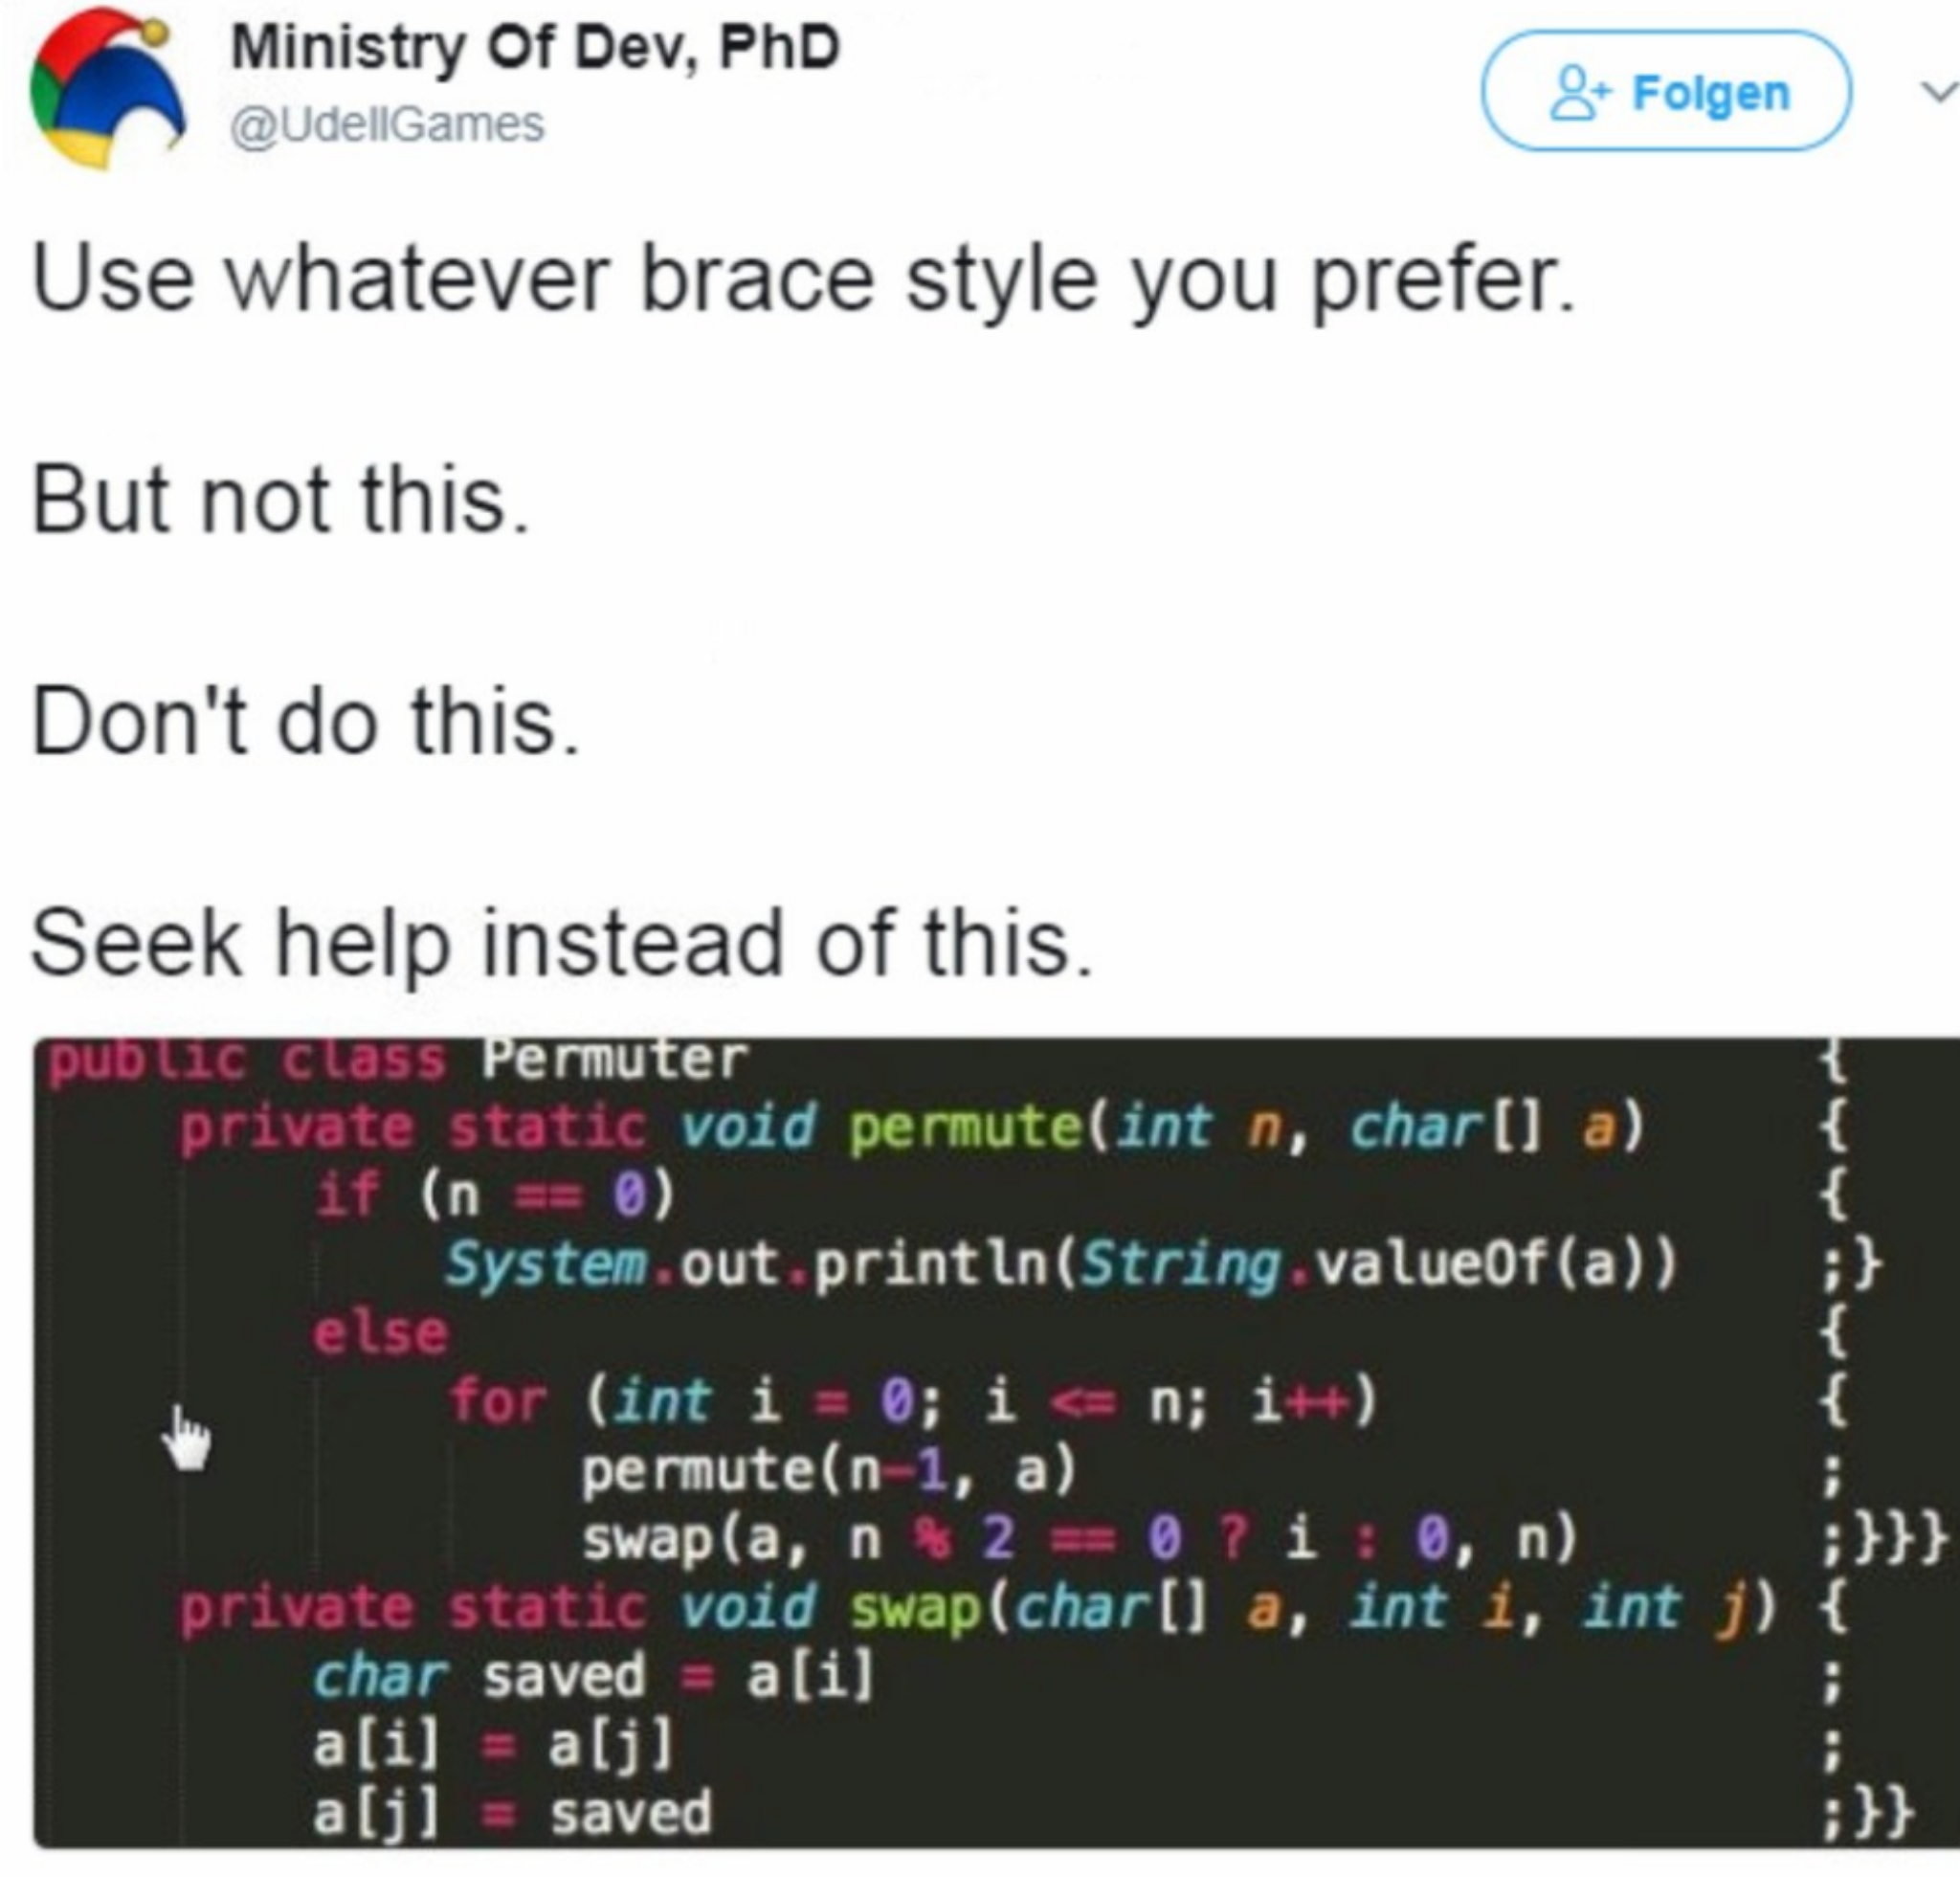 programmer meme - Ministry Of Dev, PhD 8. Folgen Use whatever brace style you prefer. But not this. Don't do this. Seek help instead of this. Public class Permuter private static void permuteint n, char a if n 0 System.out.printlnString valueOfa, else for